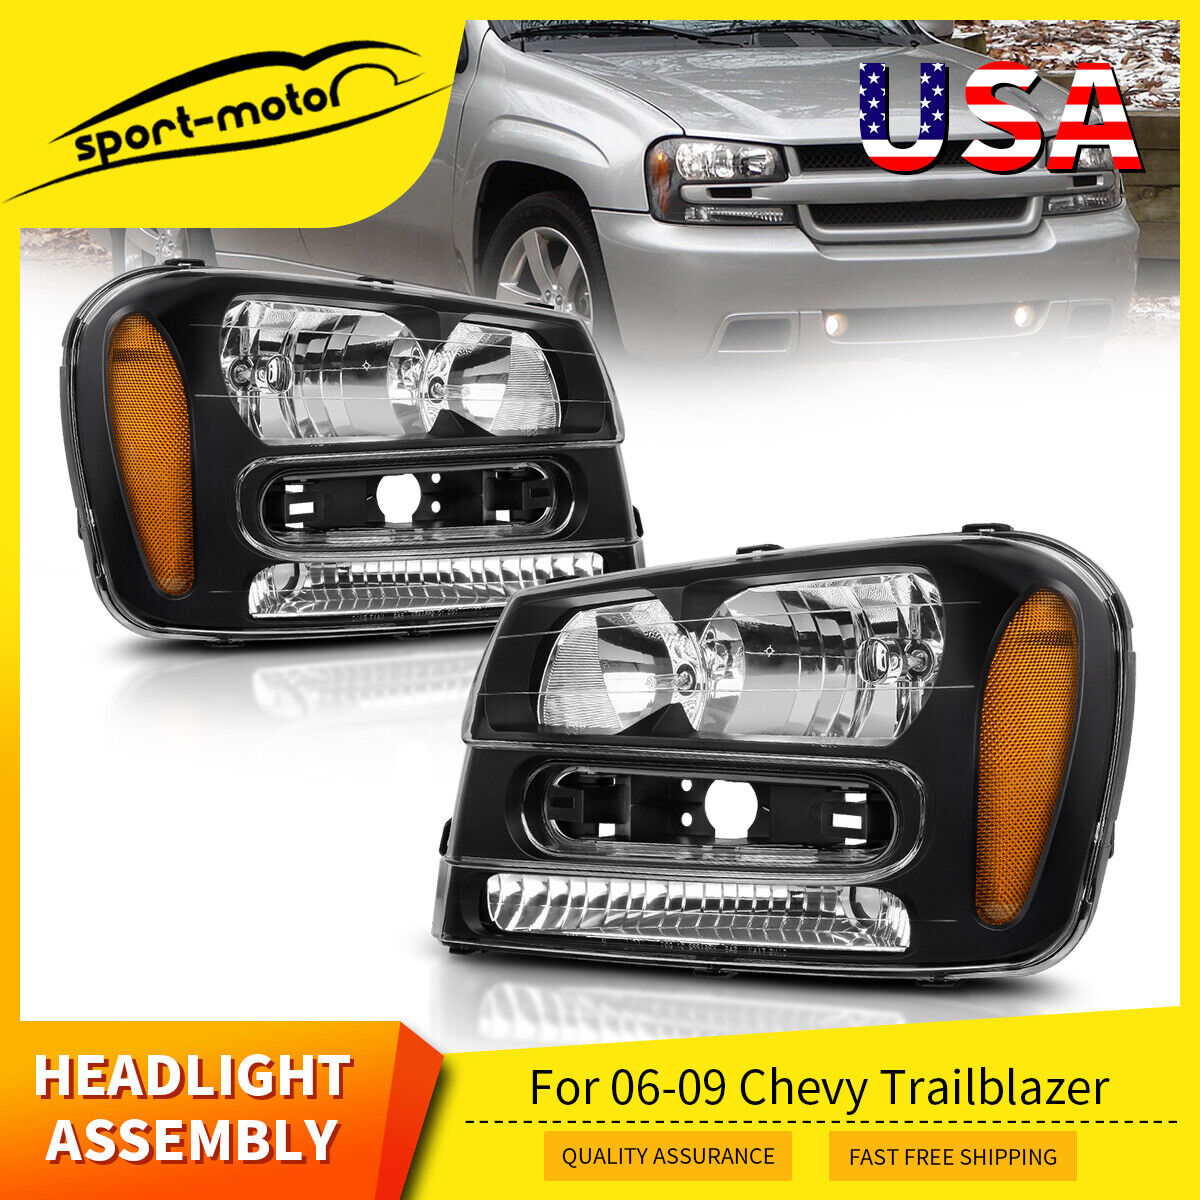 Headlights Assembly Amber Reflector Headlamps For 2002-2009 Chevy Trailblazer